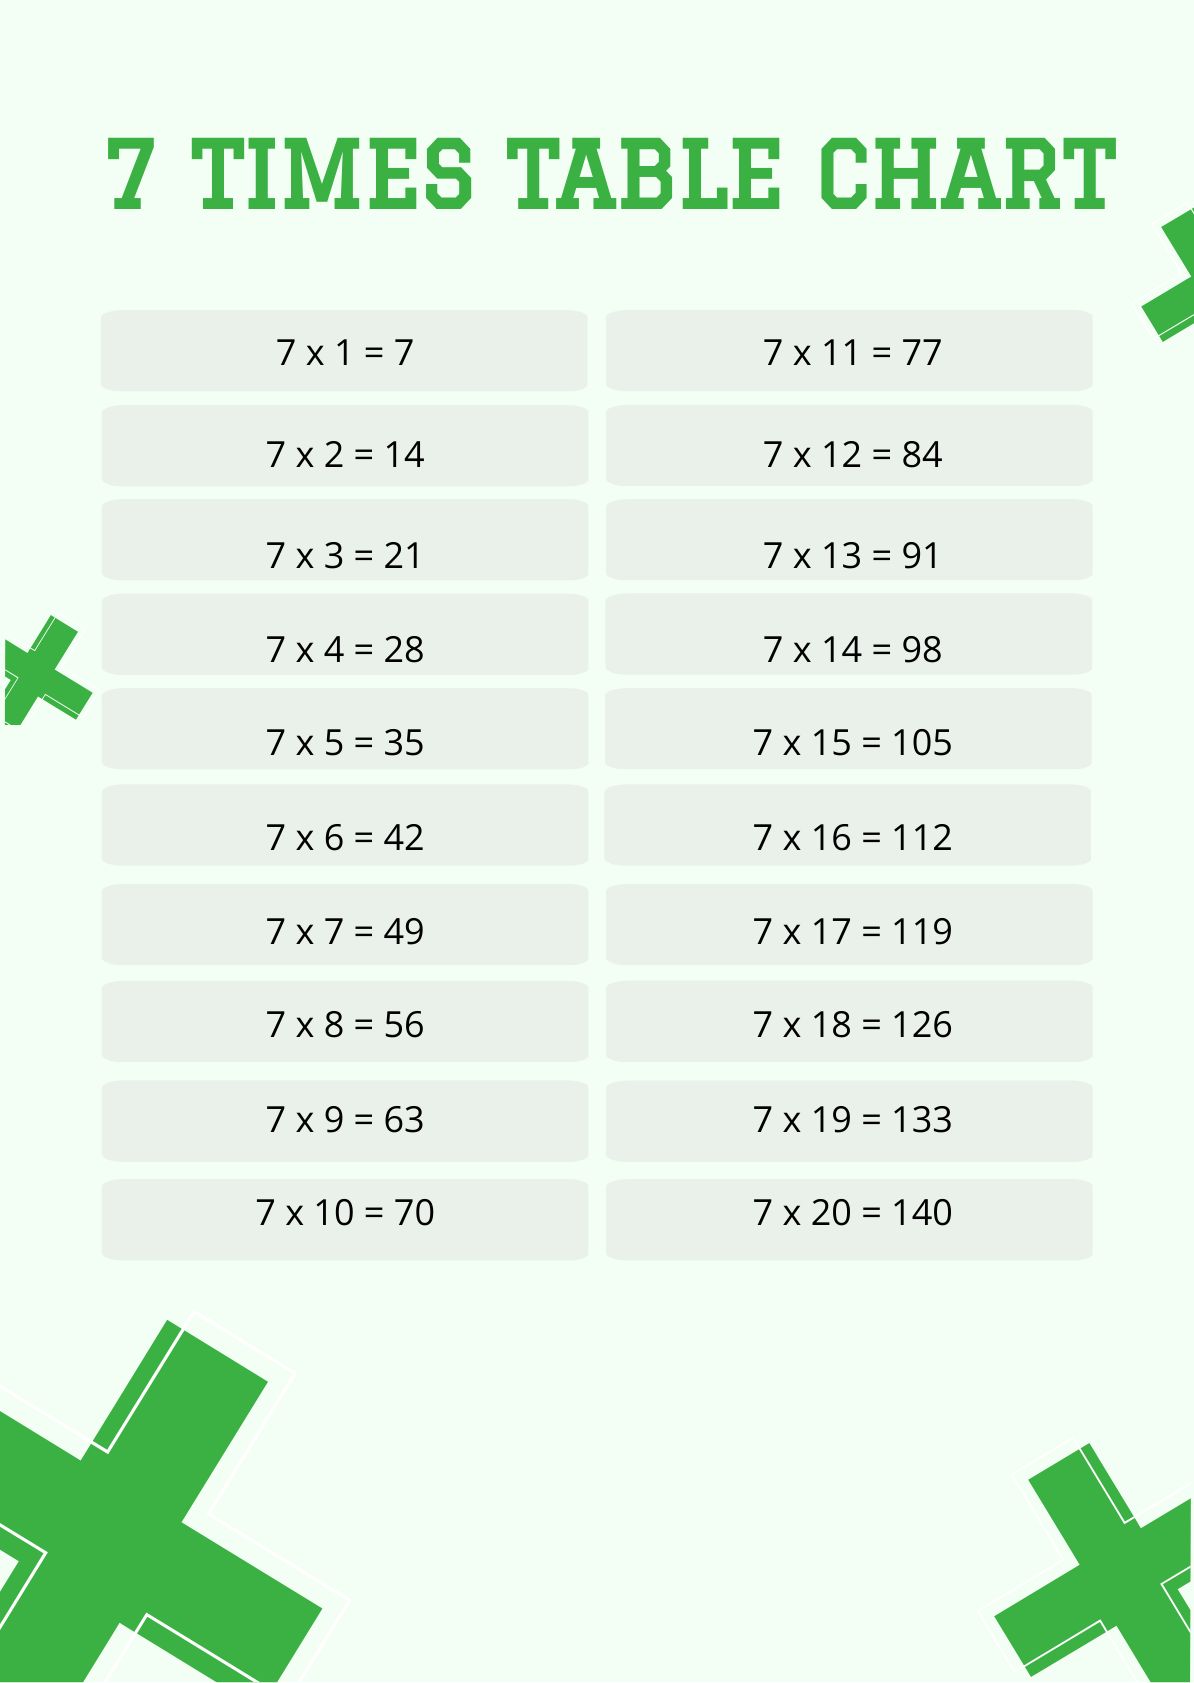 Free 7 Times Table Chart in PDF